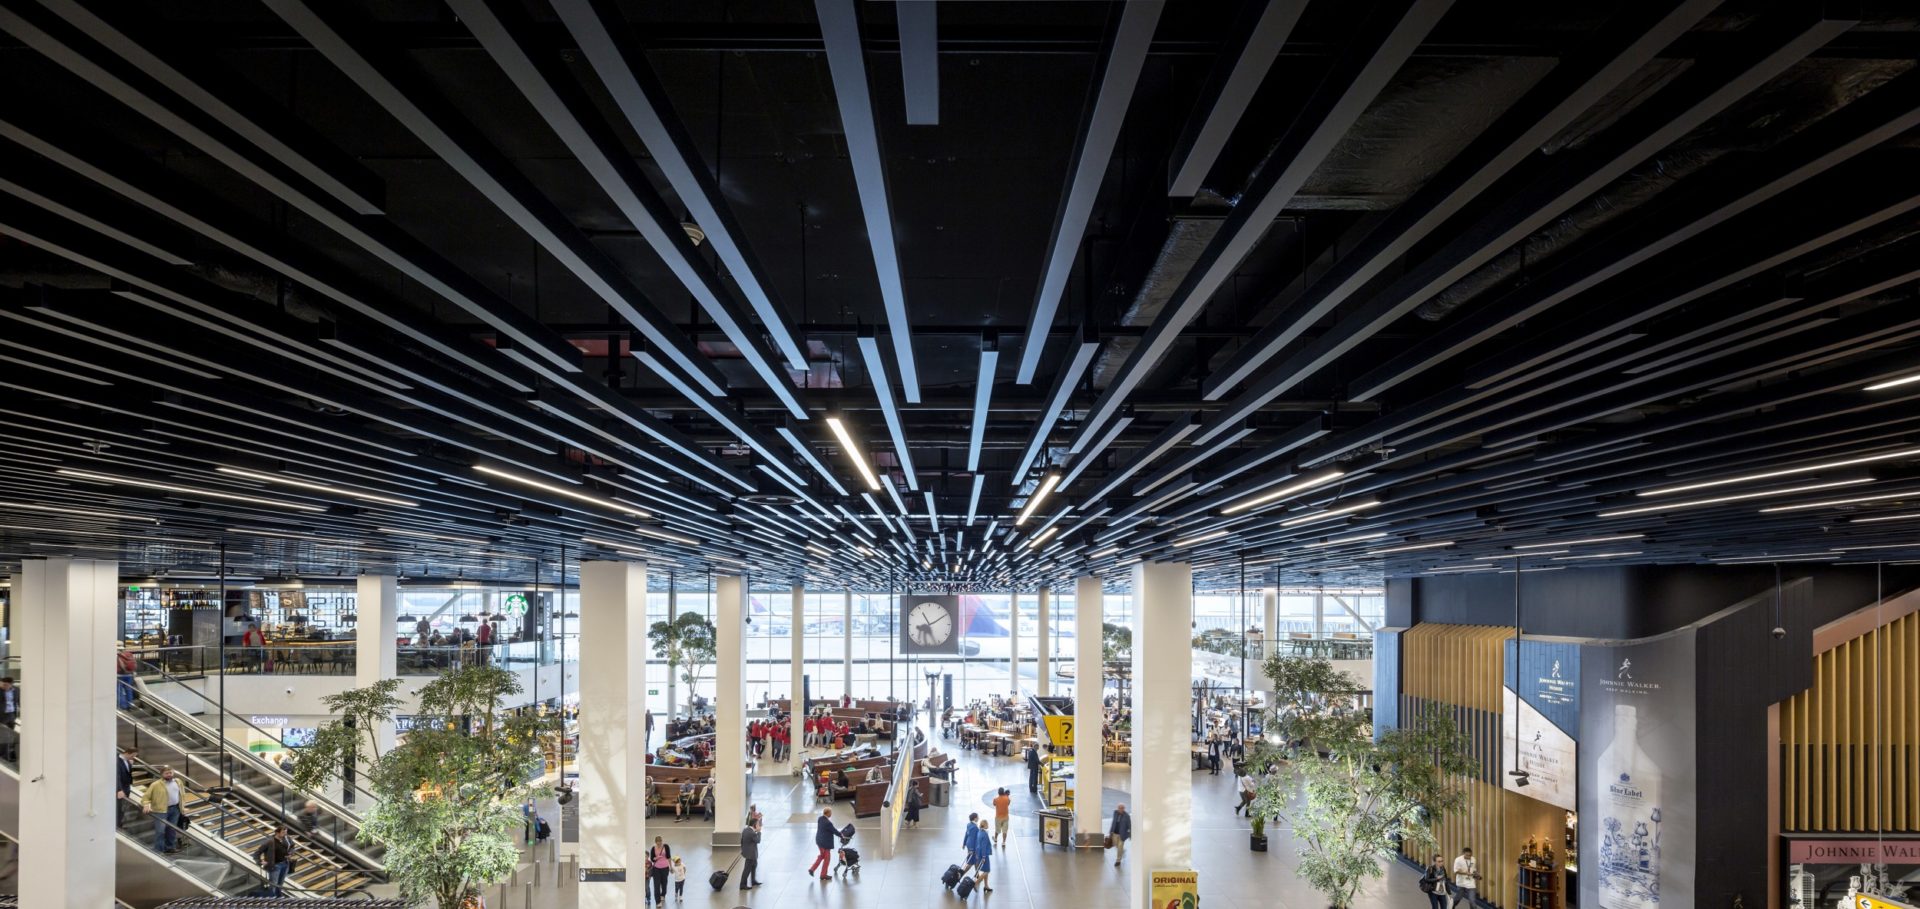 New ceiling system for Amsterdam’s Schiphol Airport